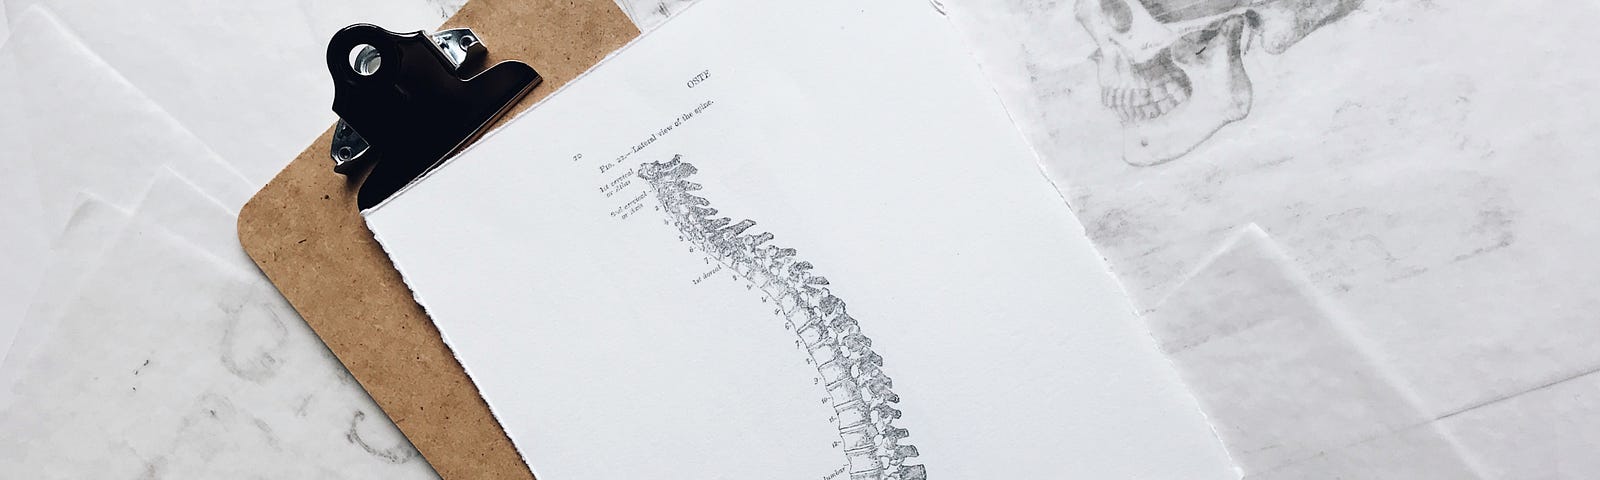 Several sketches and diagrams of the skeletal system are laid out on a table, showing the spine, skill, and the bones of the foot and hand.